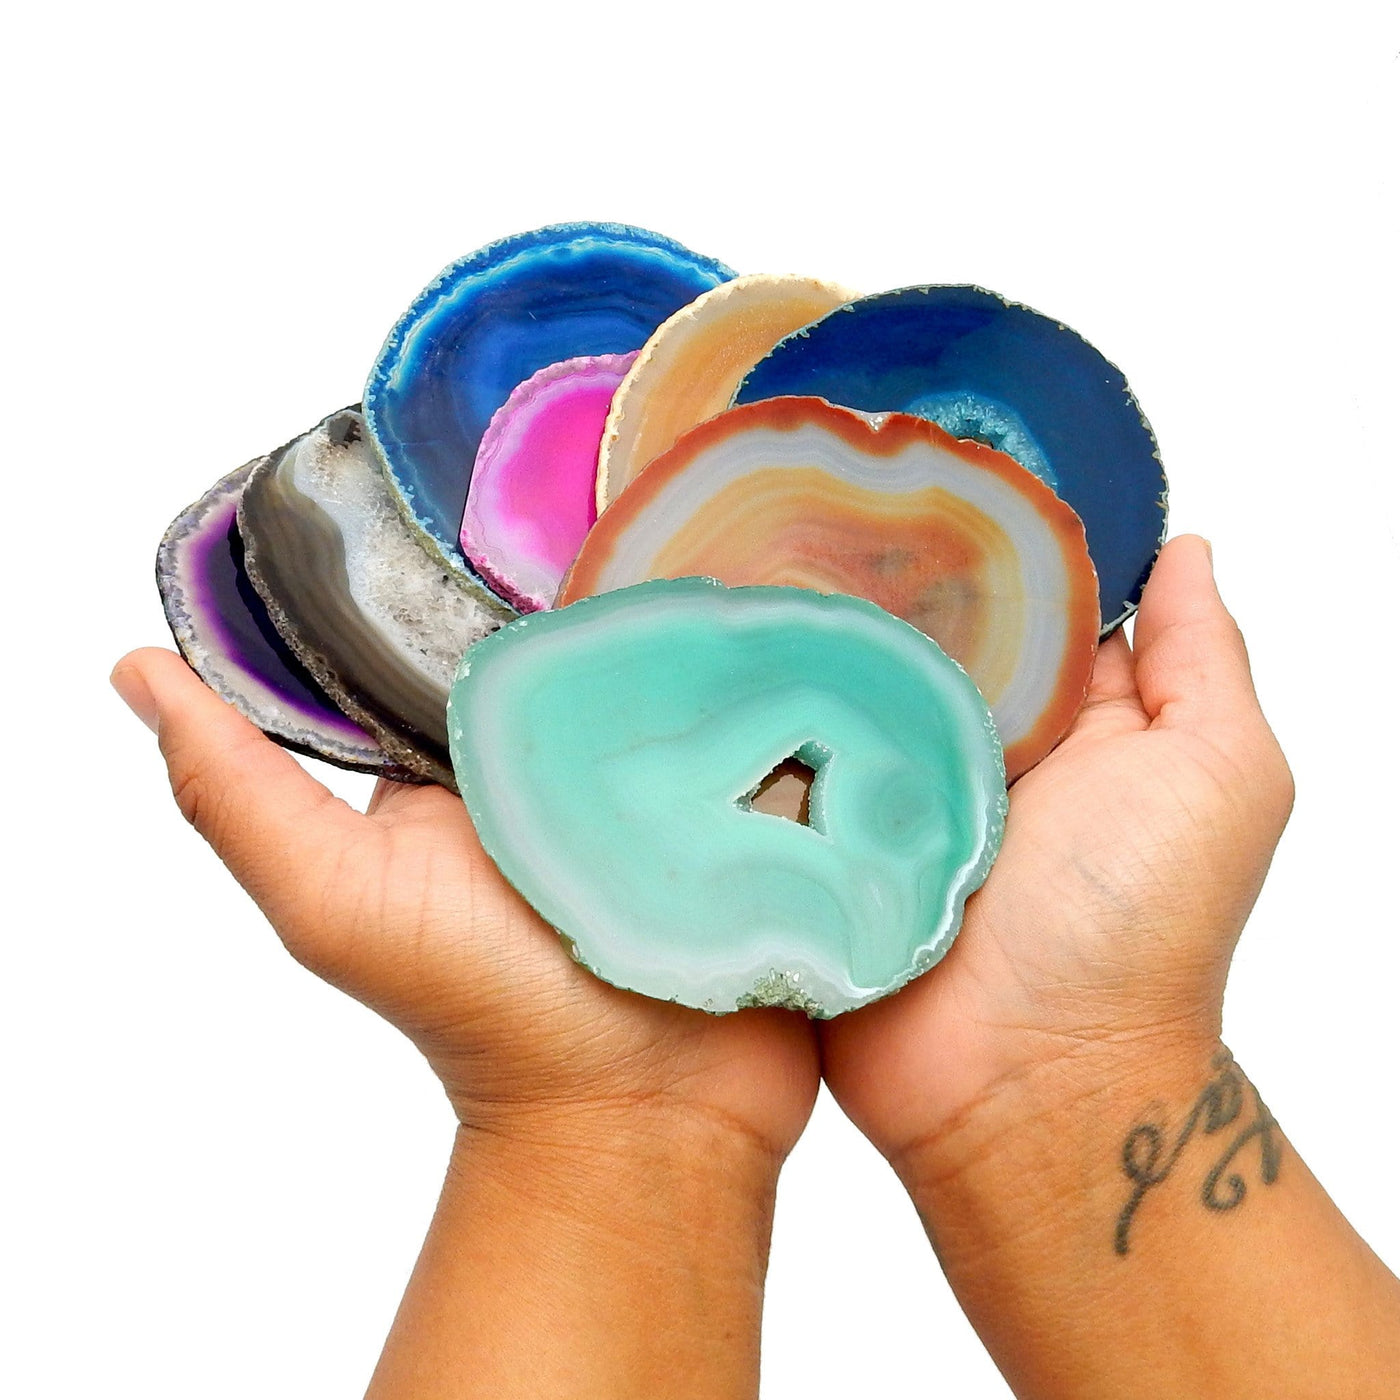 multicolor agate slices in size #4 in hand  colors come in purple black blue pink natural teal orange green